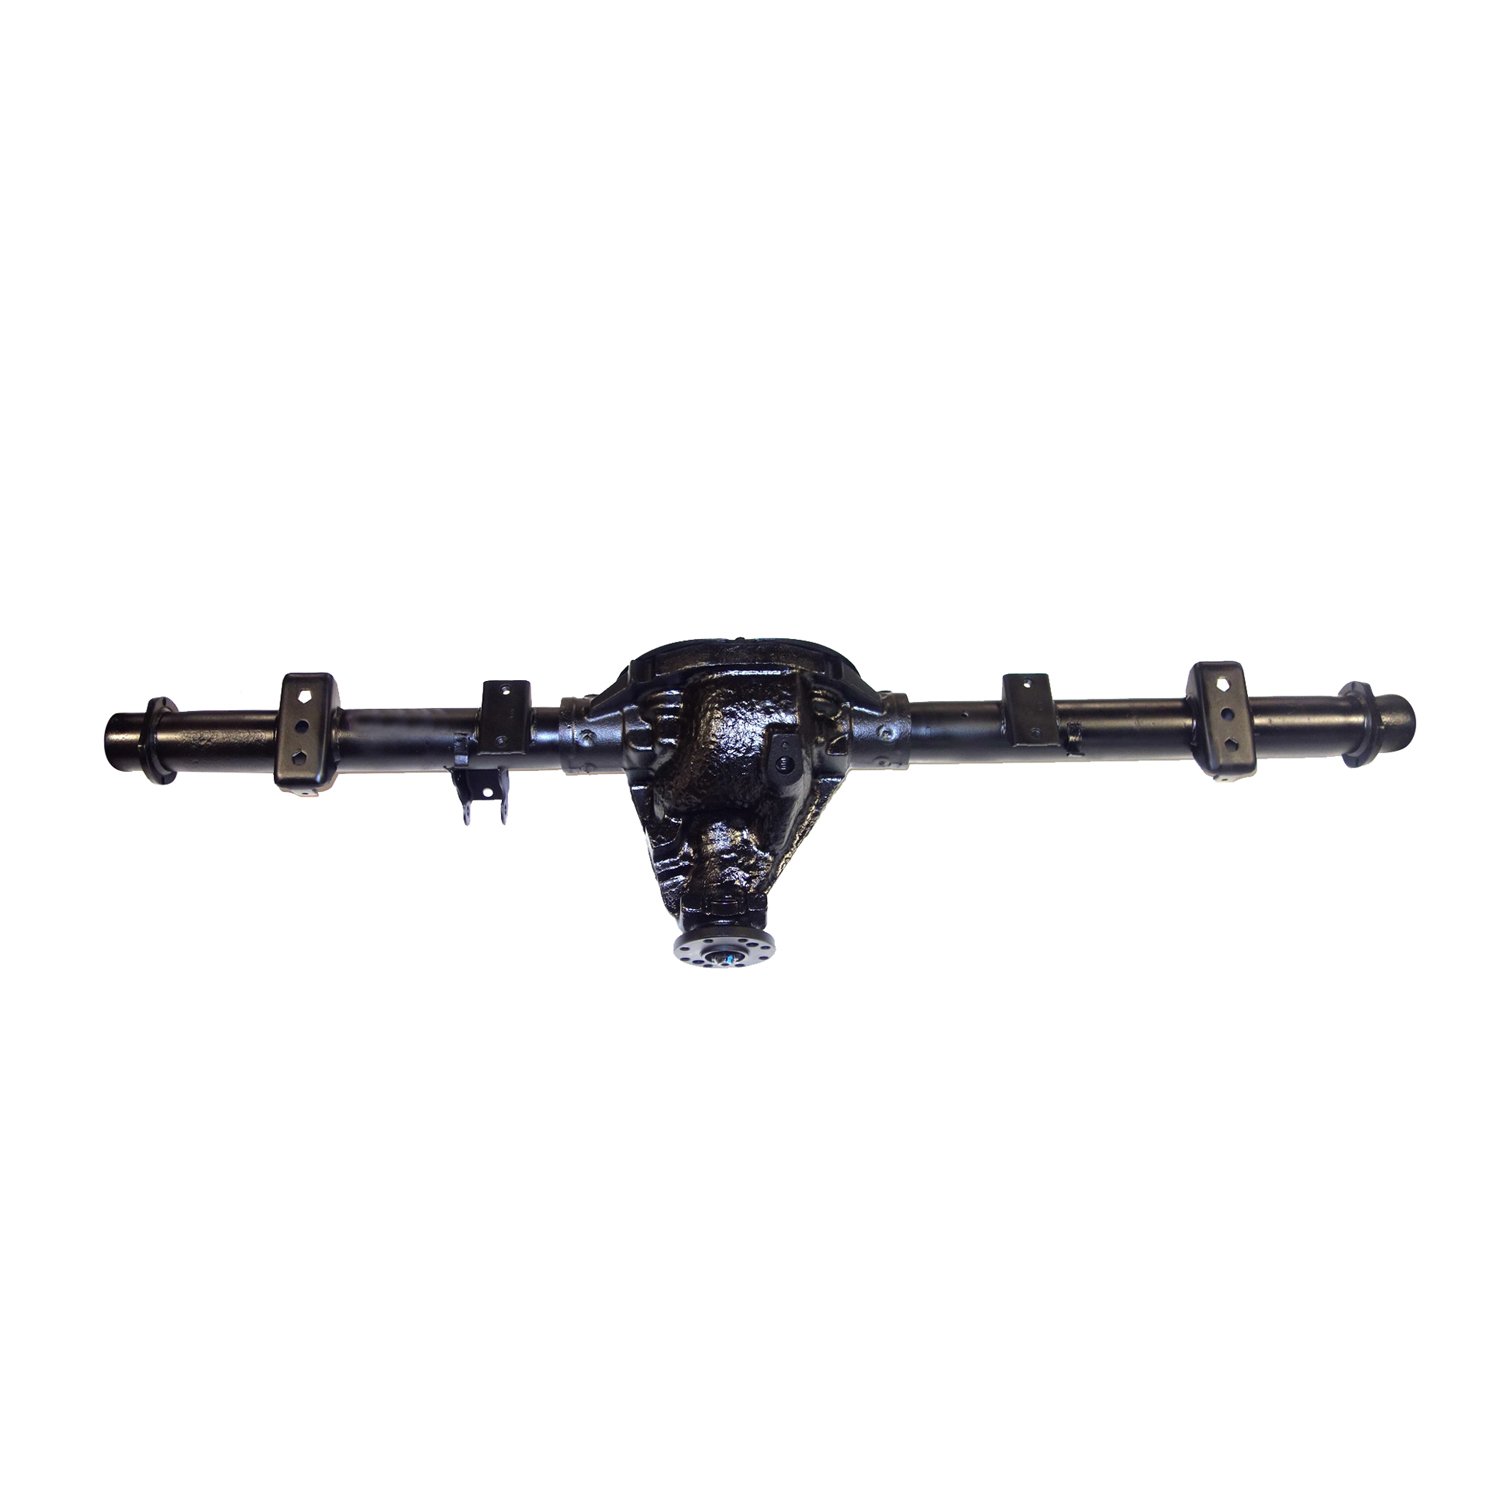 Remanufactured Axle Assy Chy 8.25" 04-05 Durango 3.92 , 4x4 w/ Traction Control, Posi LSD